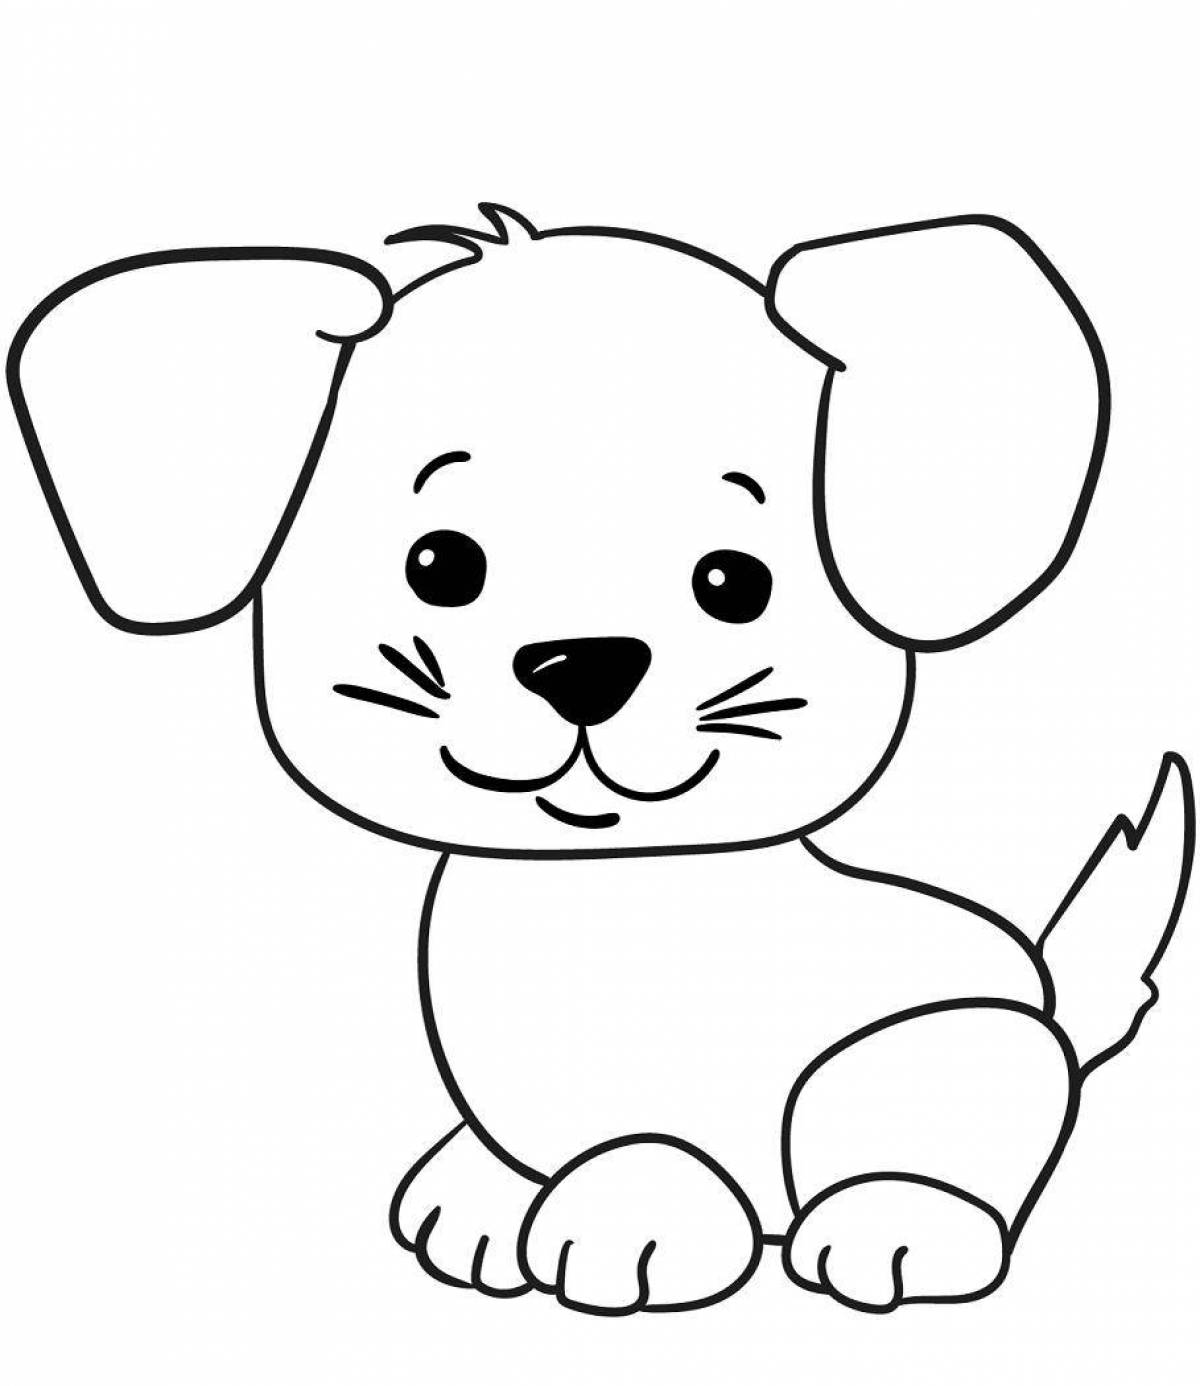 Funny dog ​​coloring book for 2-3 year olds